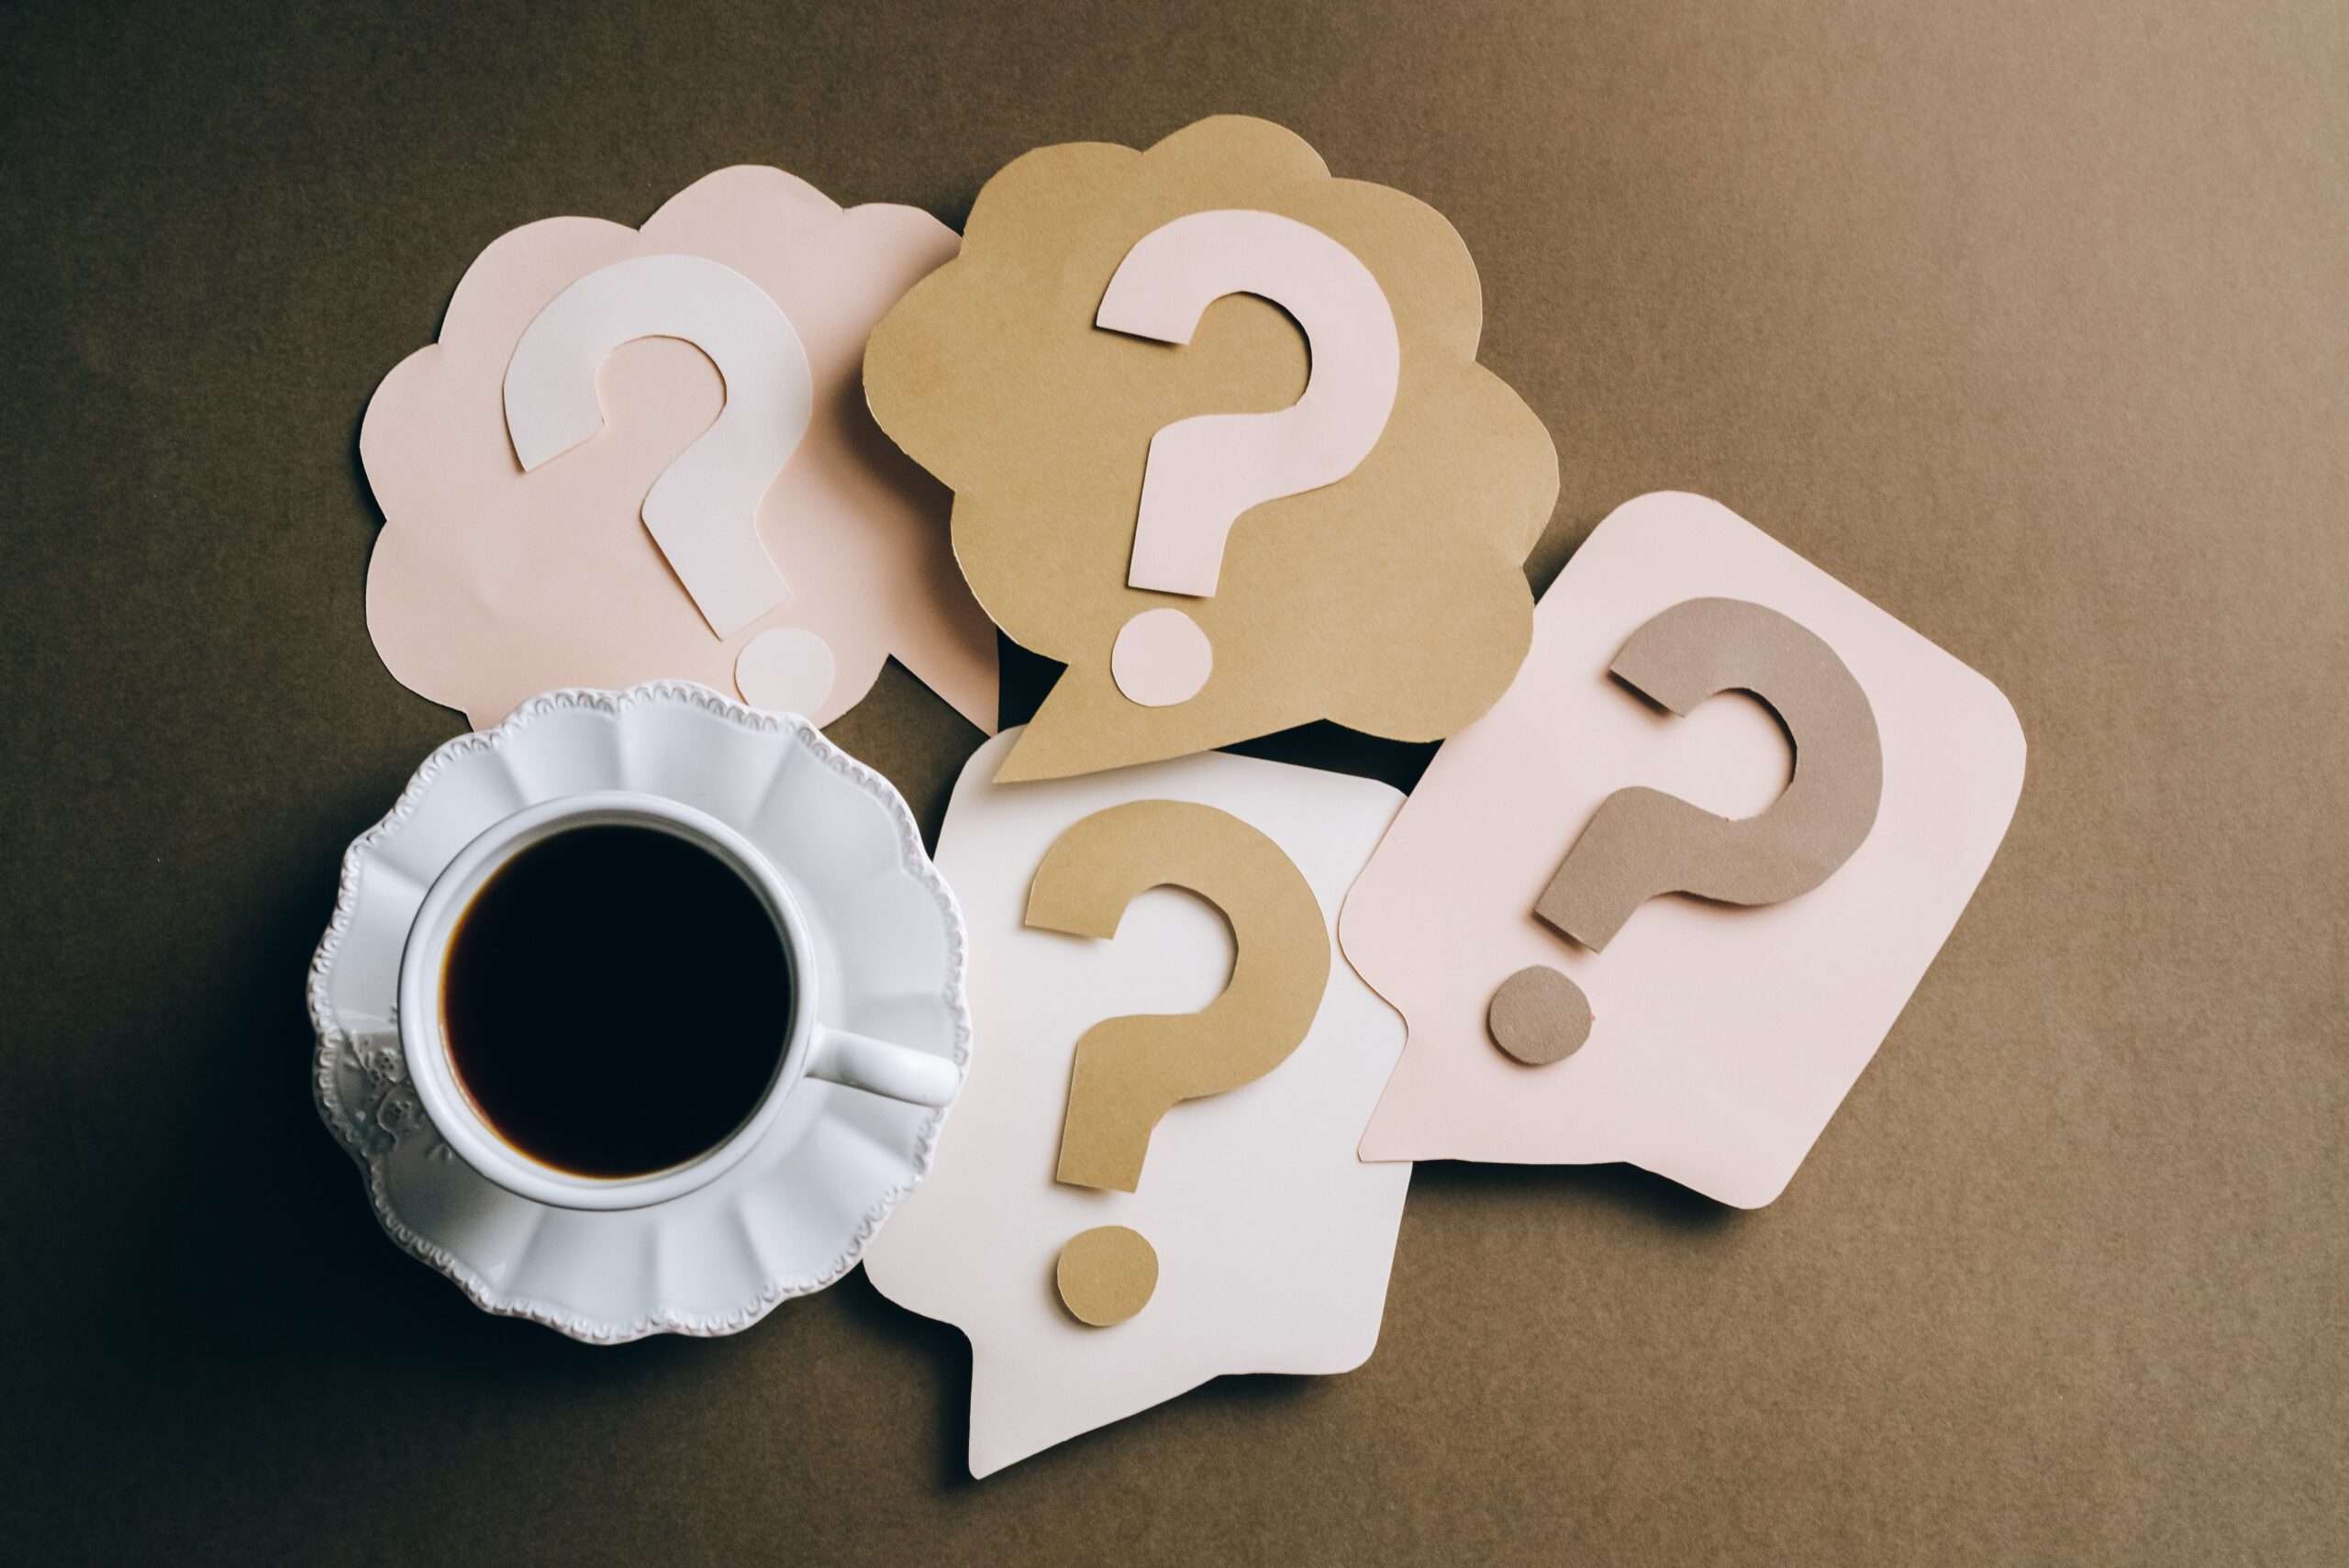 Questions Marks and a cup of coffee